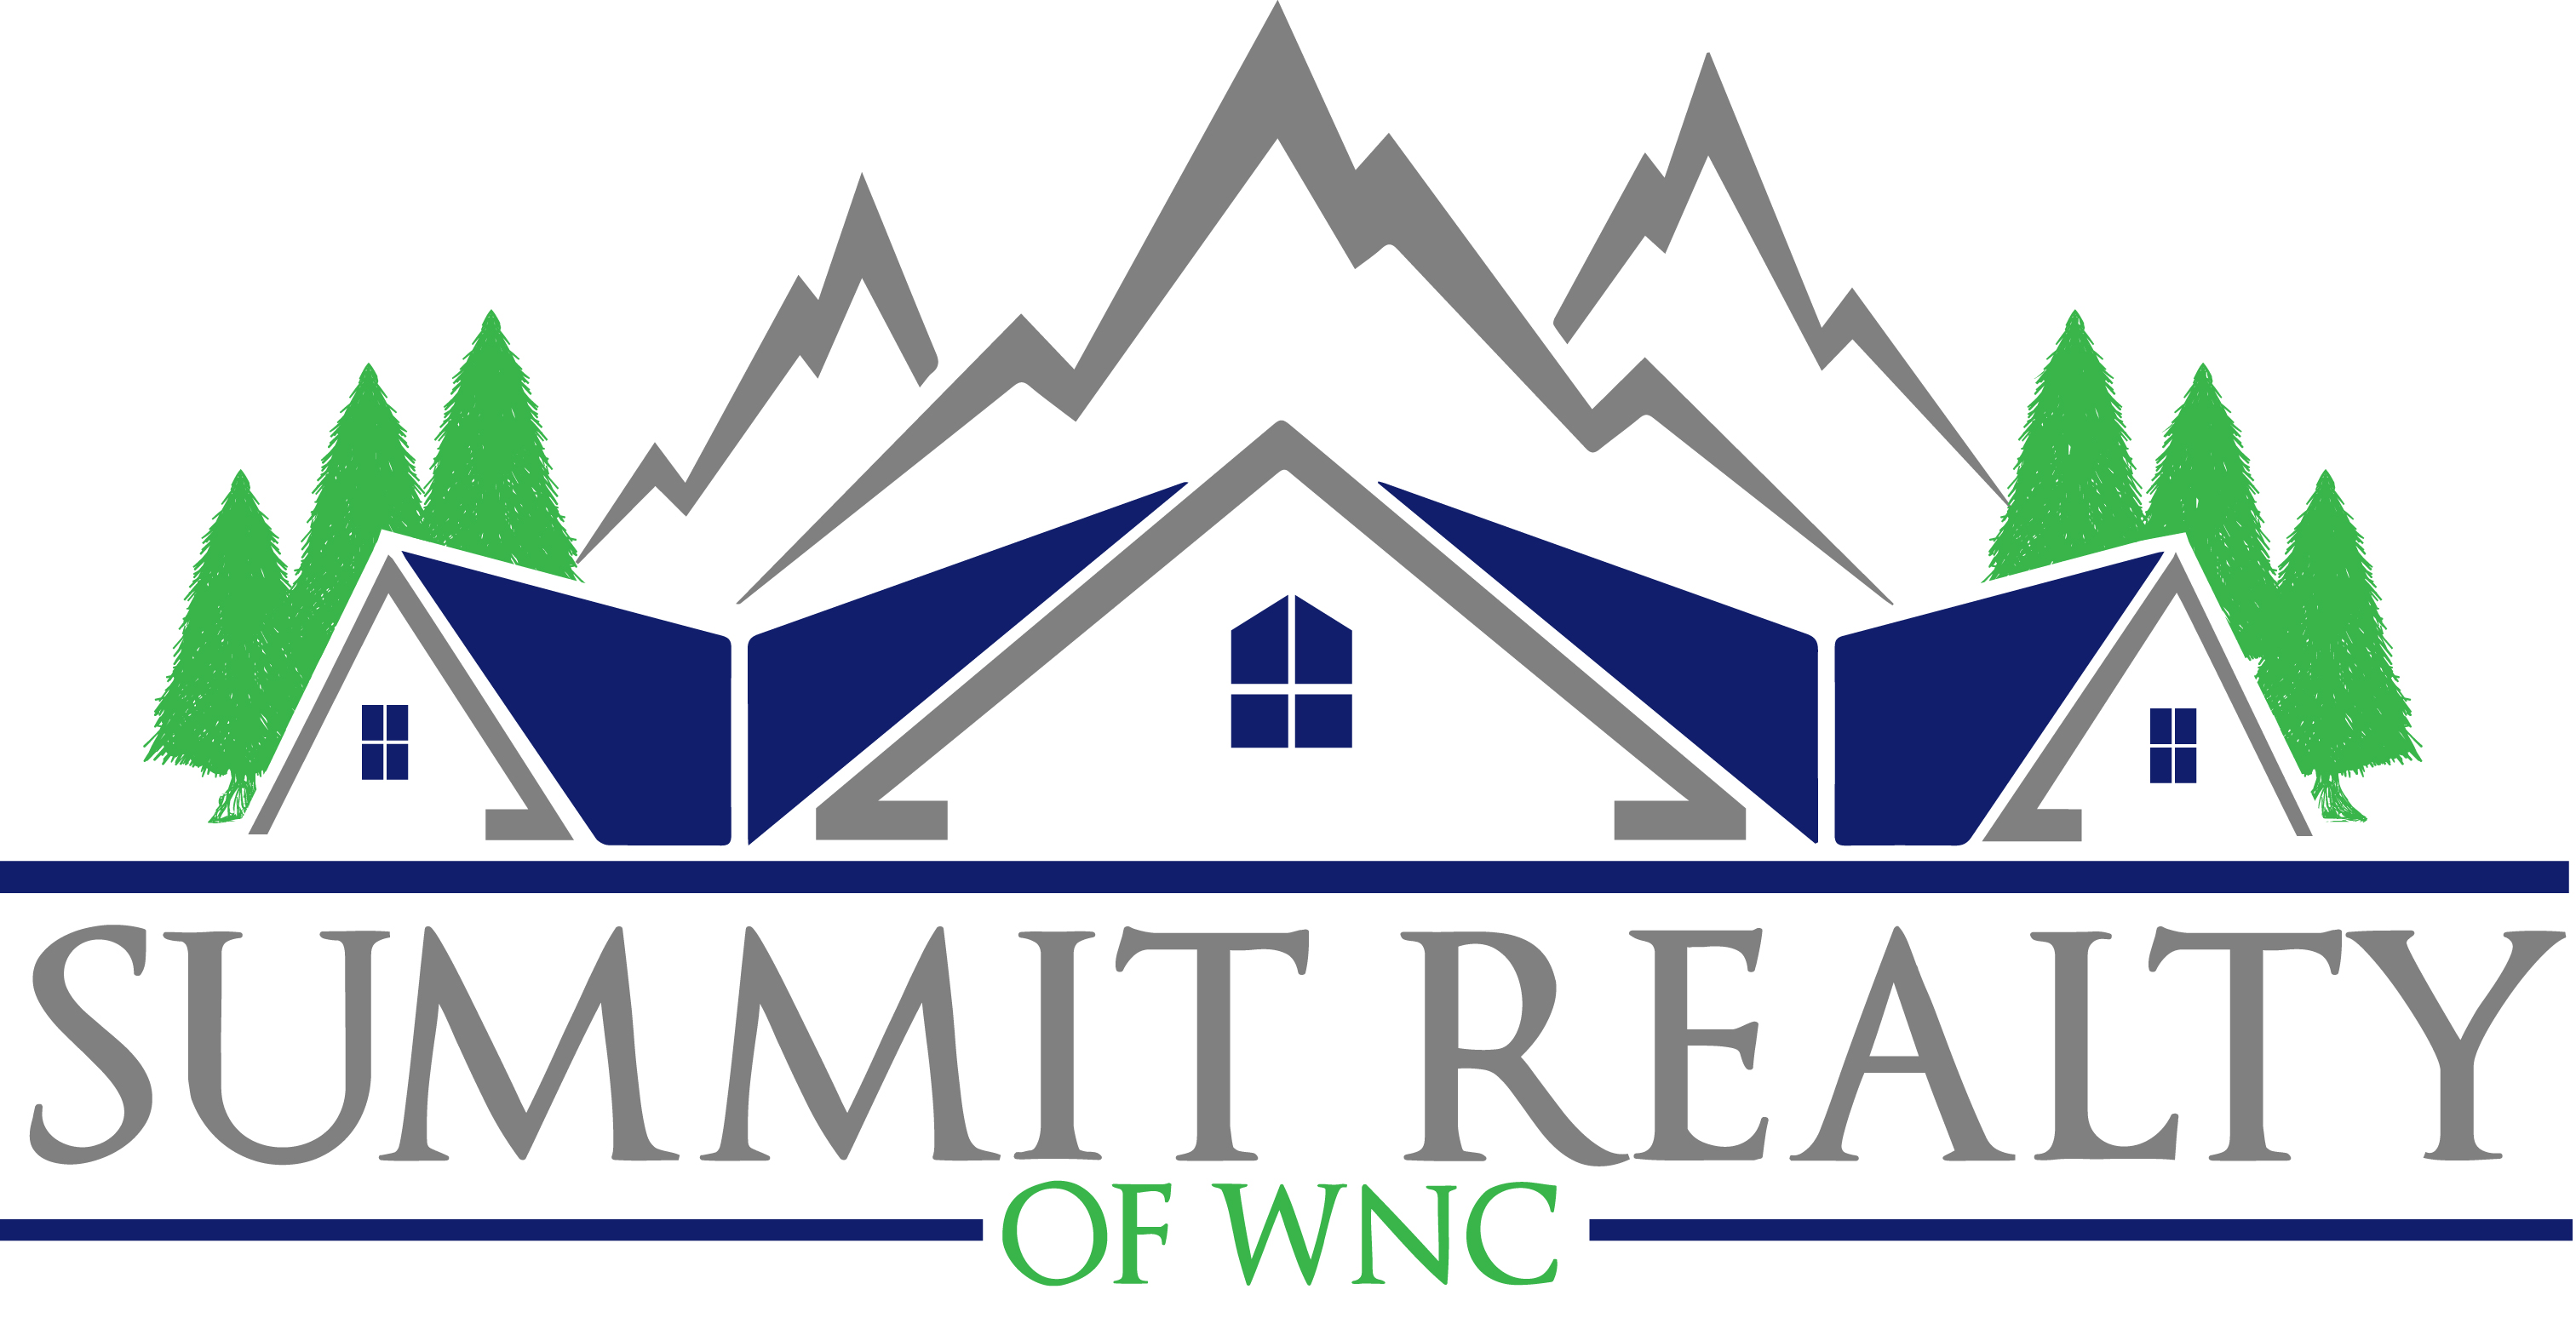 Summit Realty Of WNC, Inc